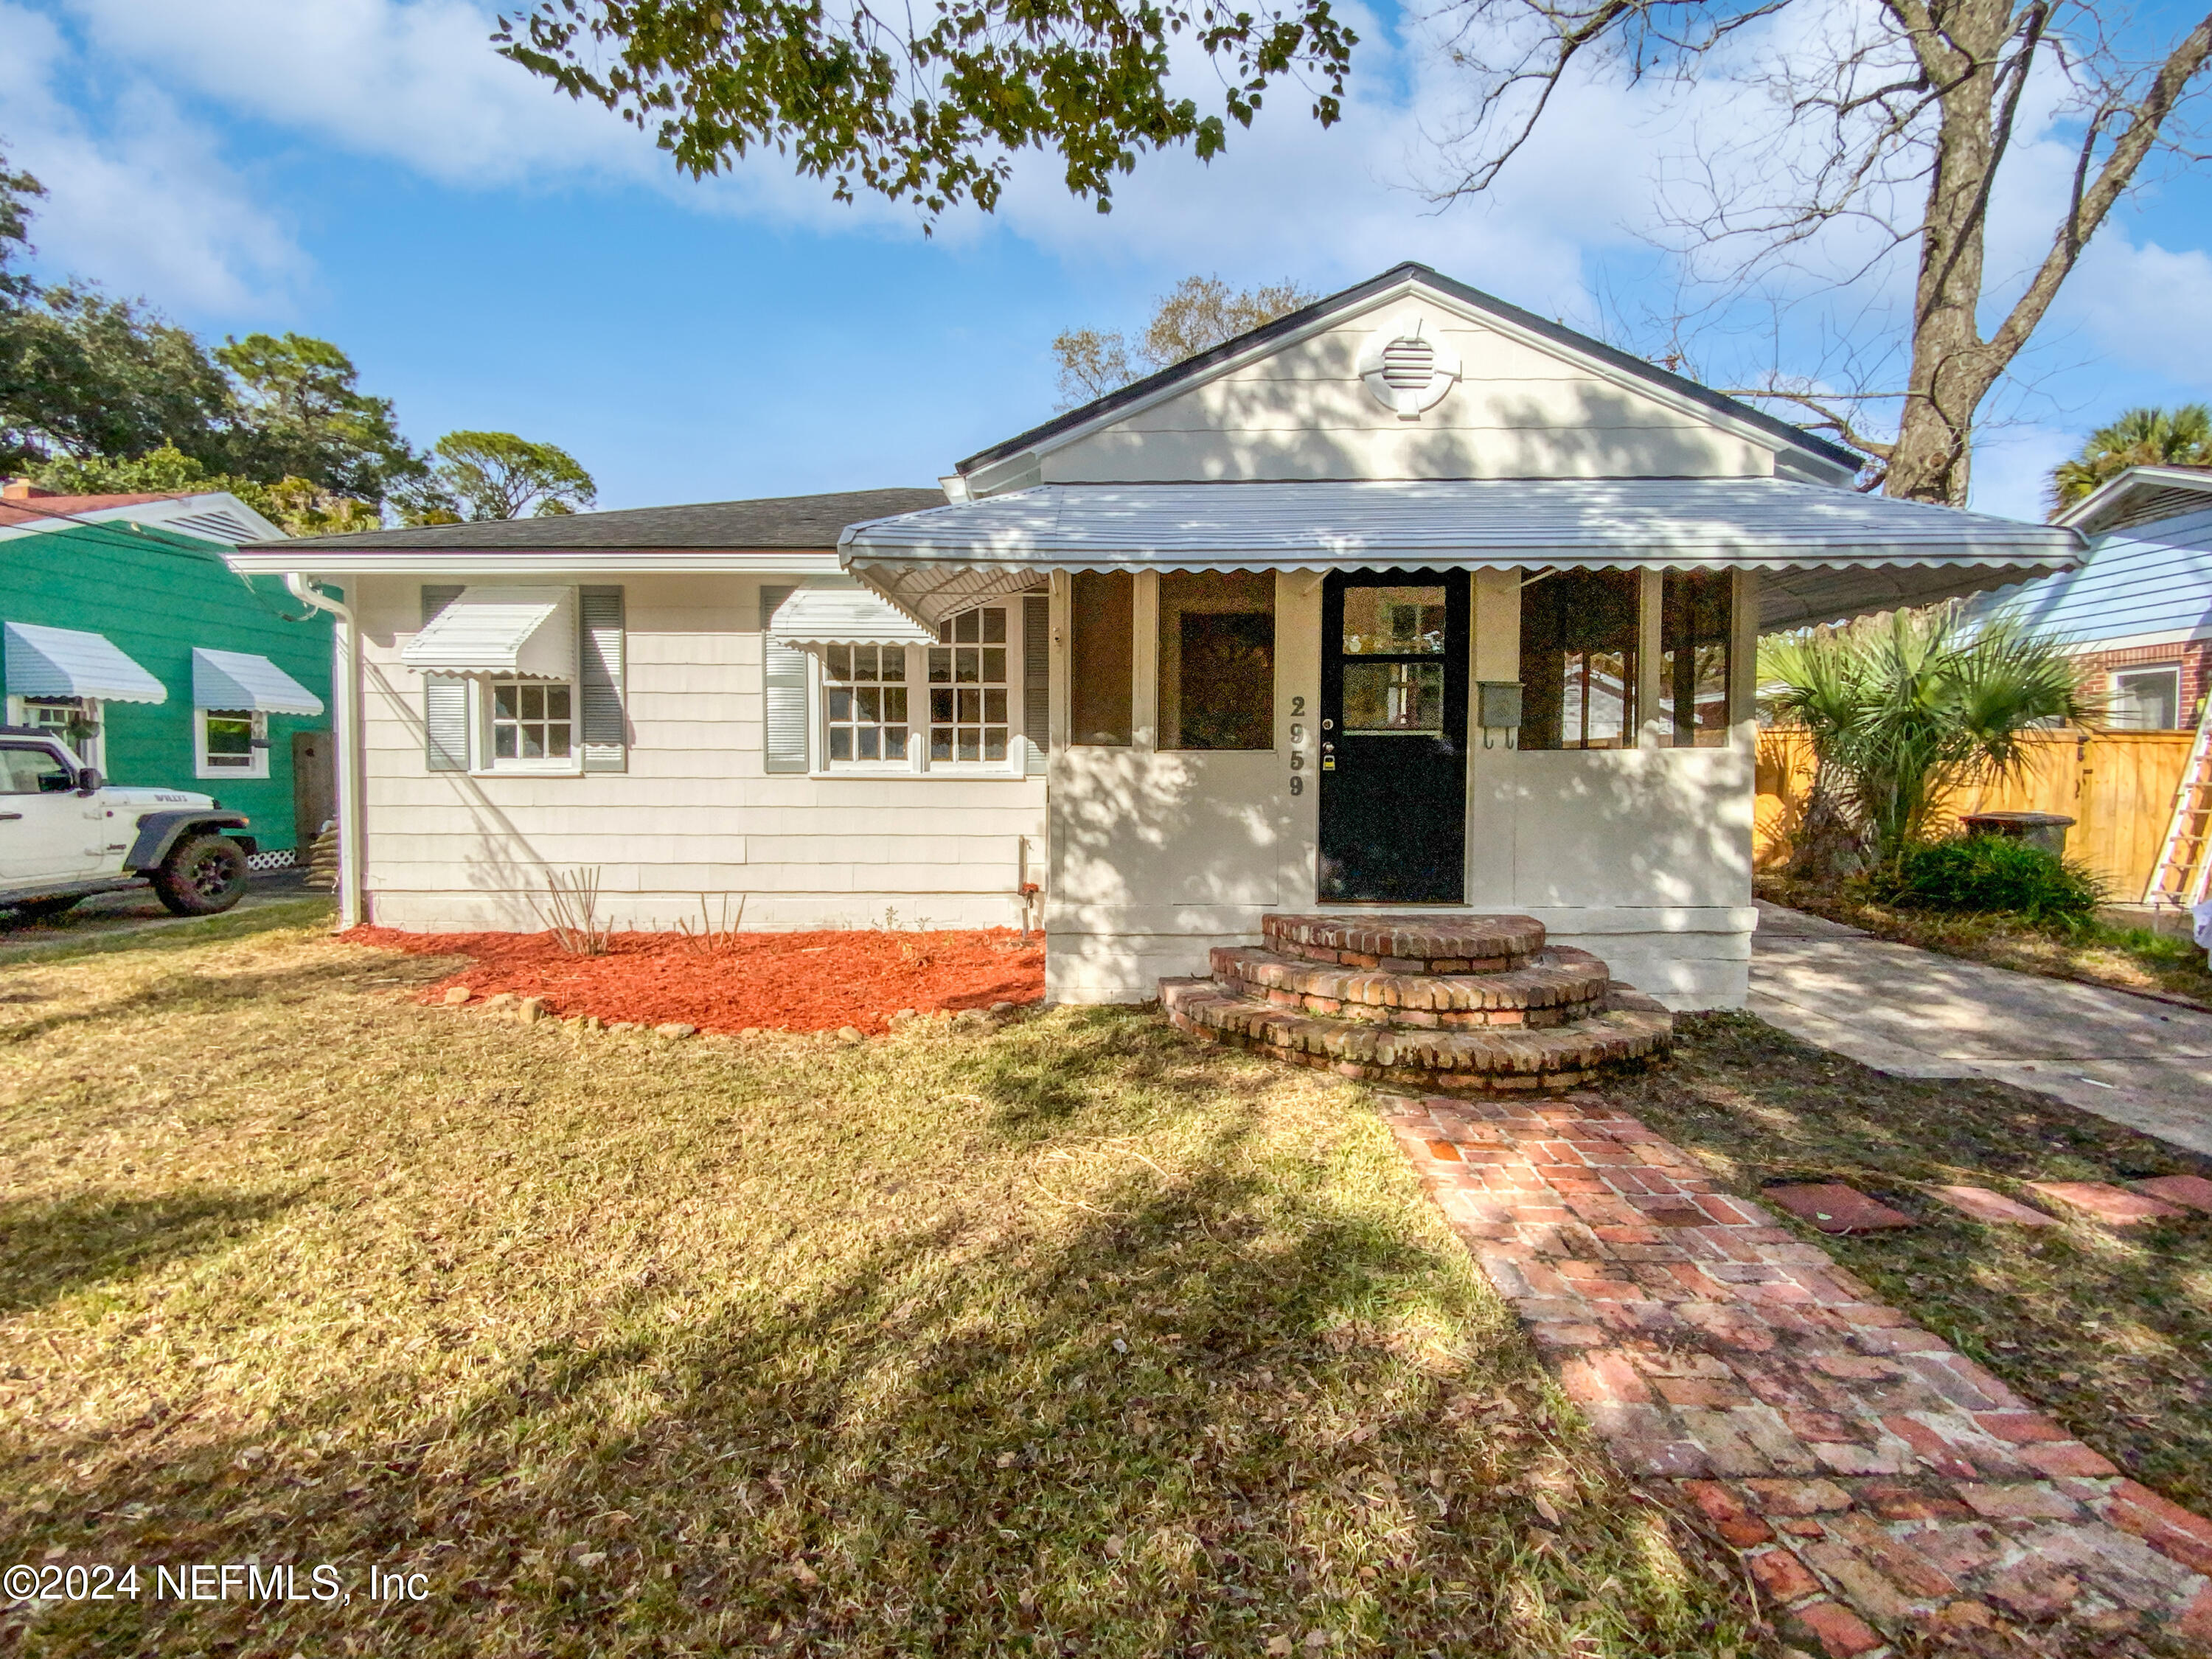 Jacksonville, FL home for sale located at 2959 COLLIER Avenue, Jacksonville, FL 32205